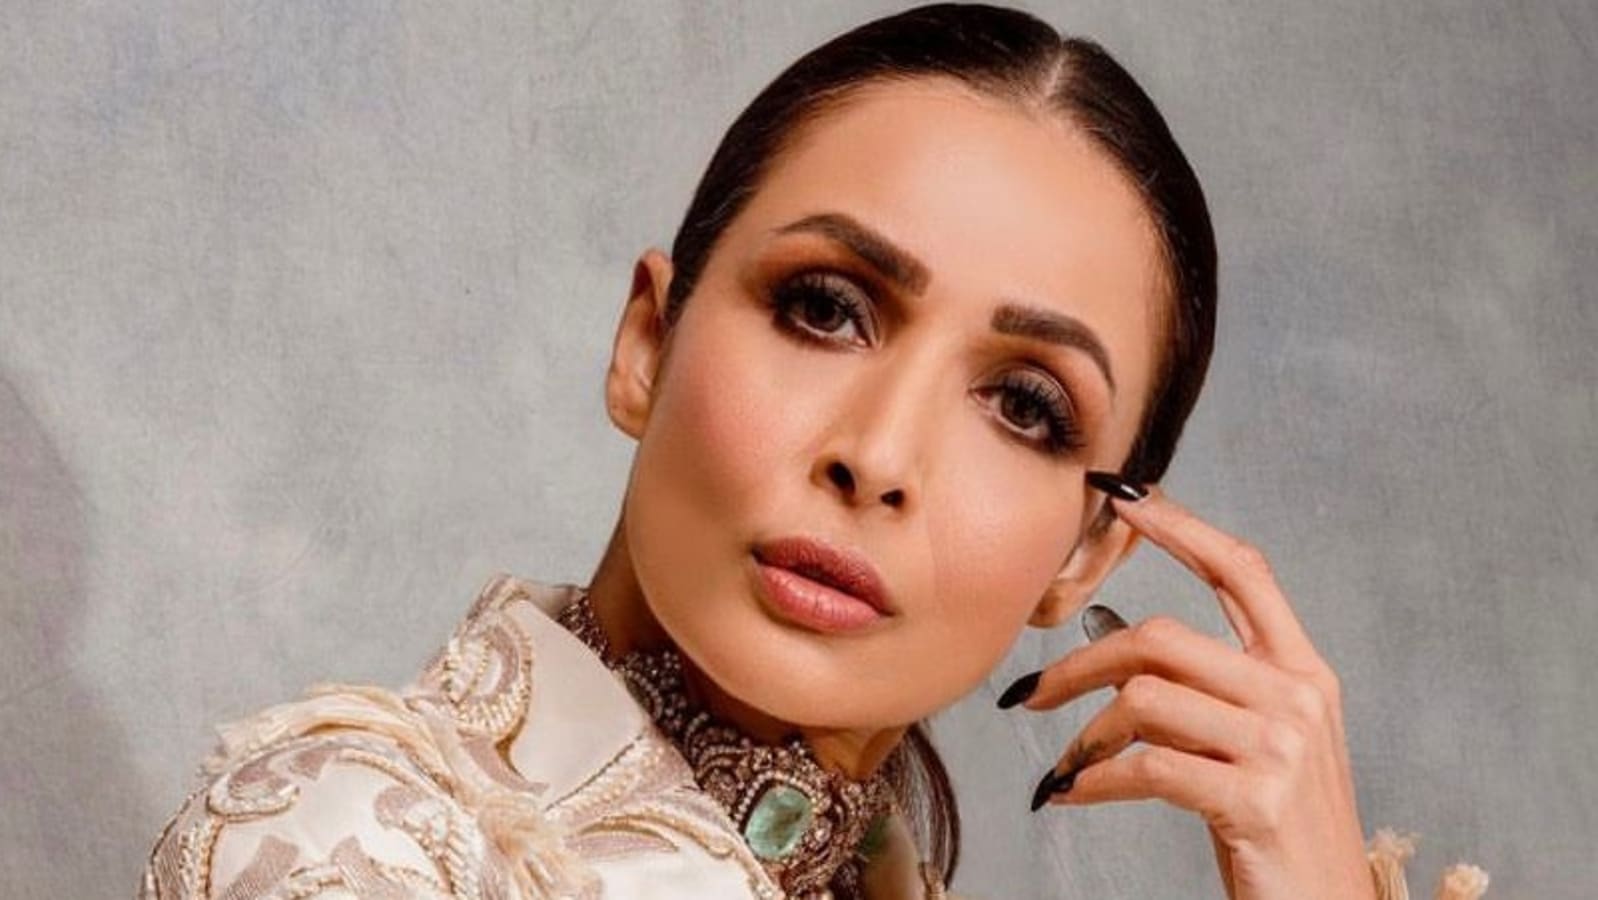 Malaika Arora says she faces her share of insecurities Web Series